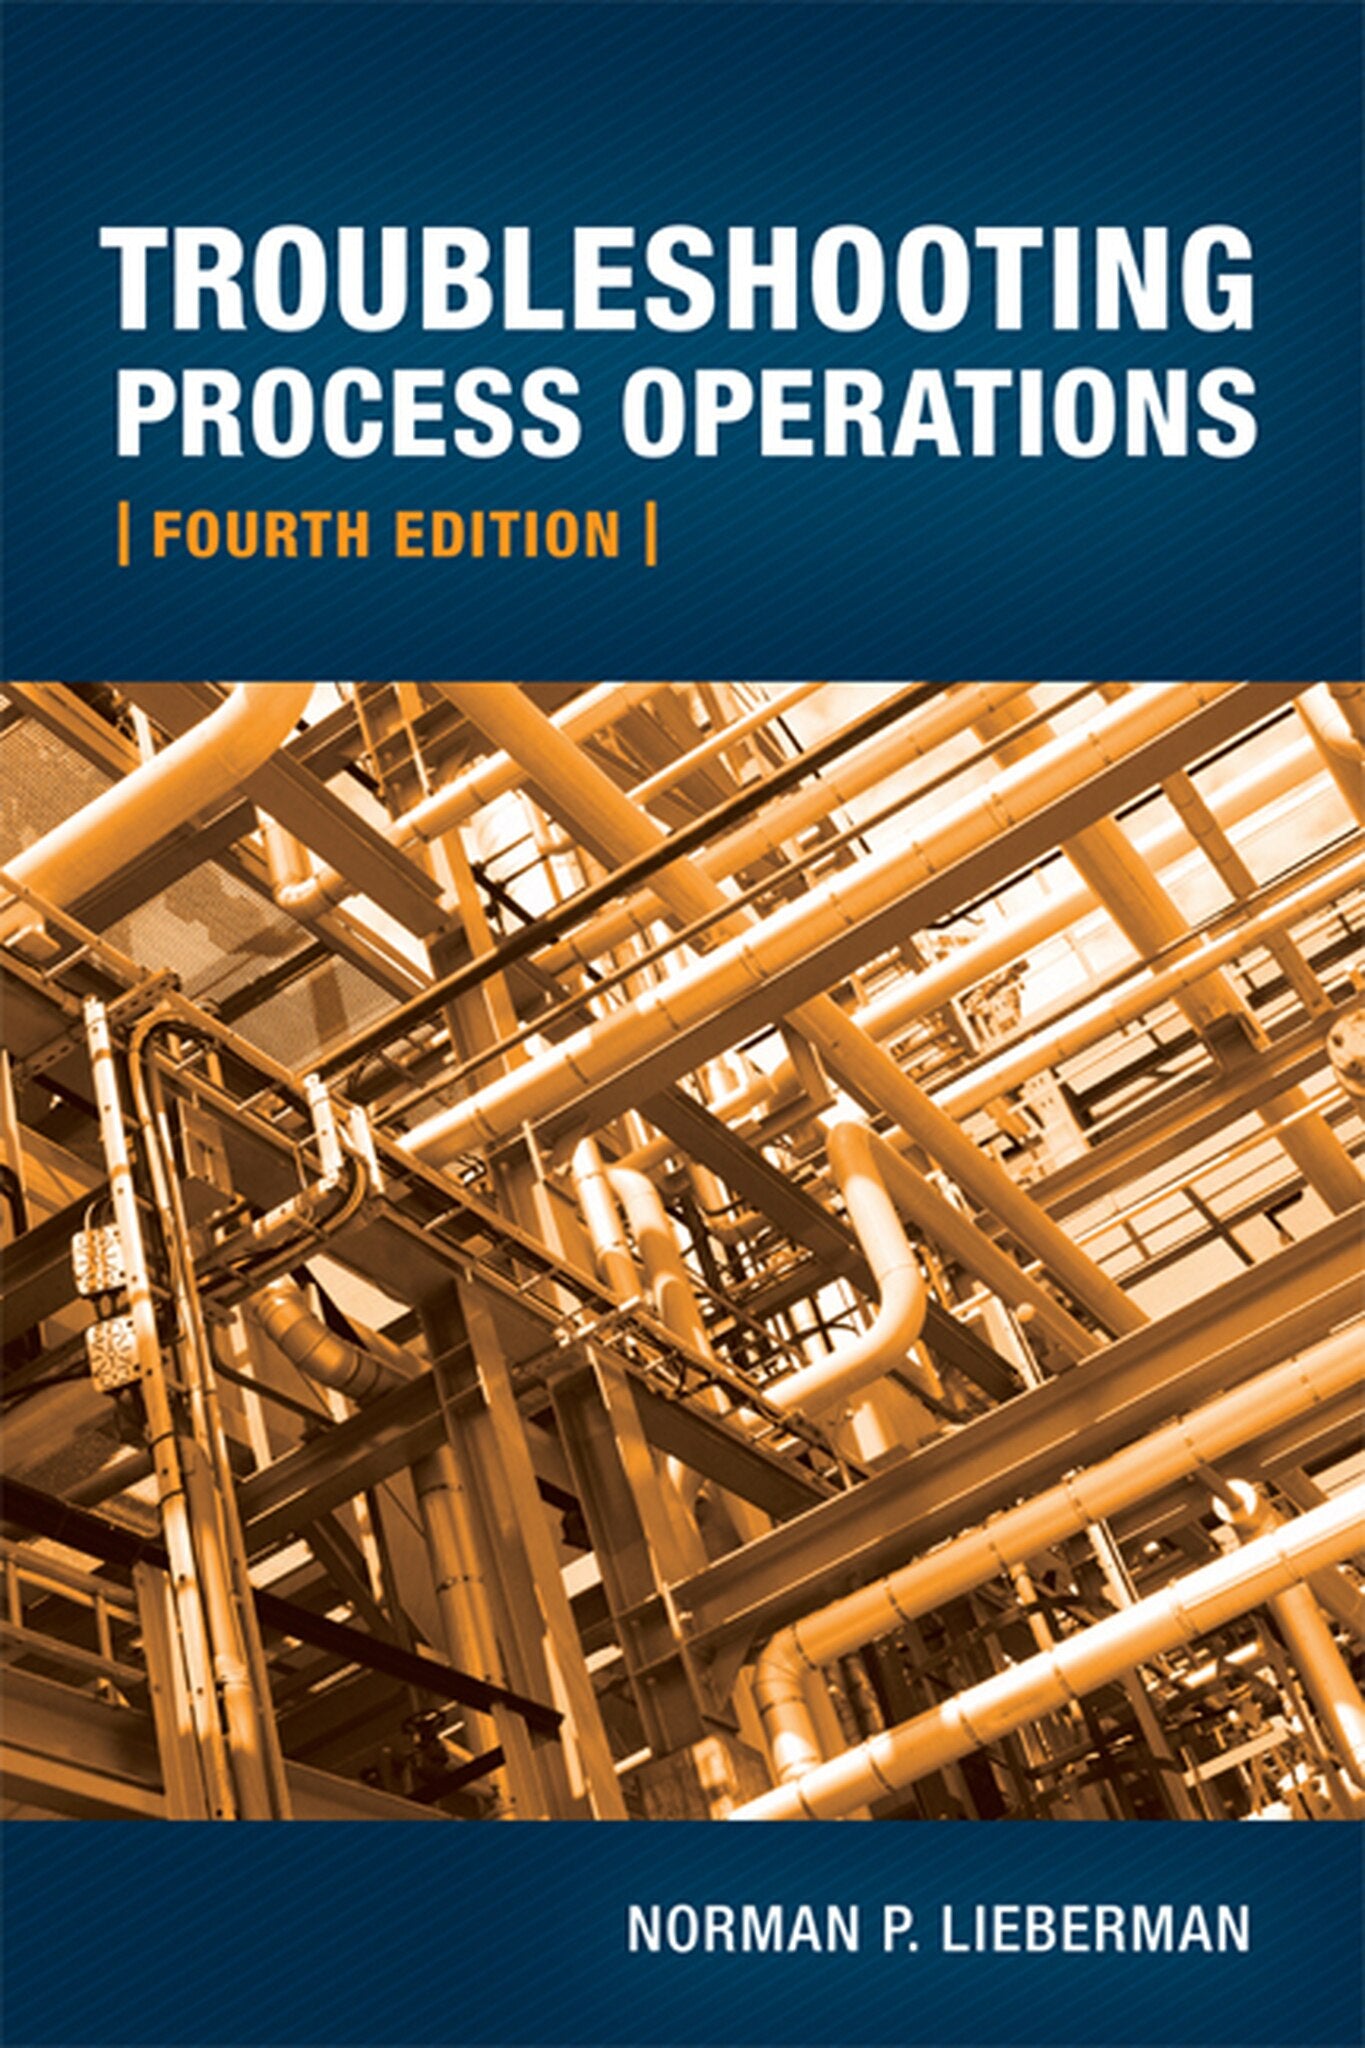 Troubleshooting Process Operations Fourth Edition by Norman P. Lieberman